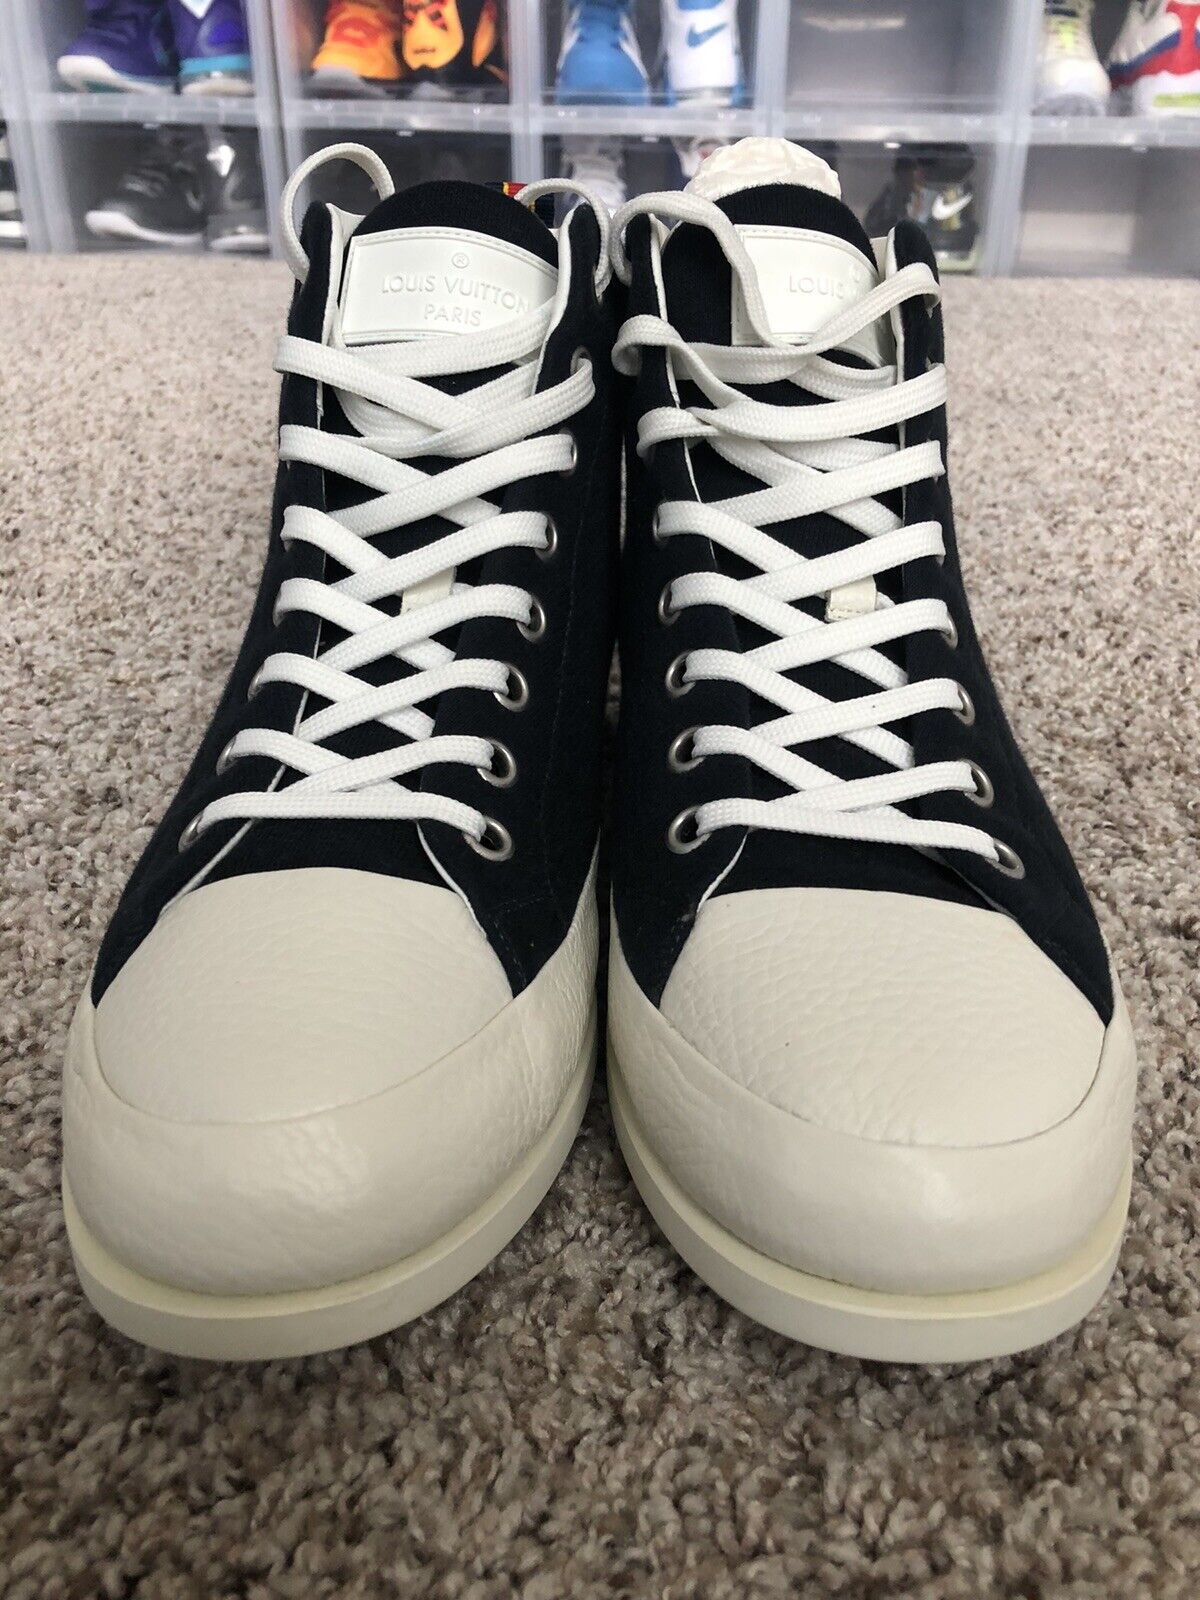 blue and black louis vuitton sneakers